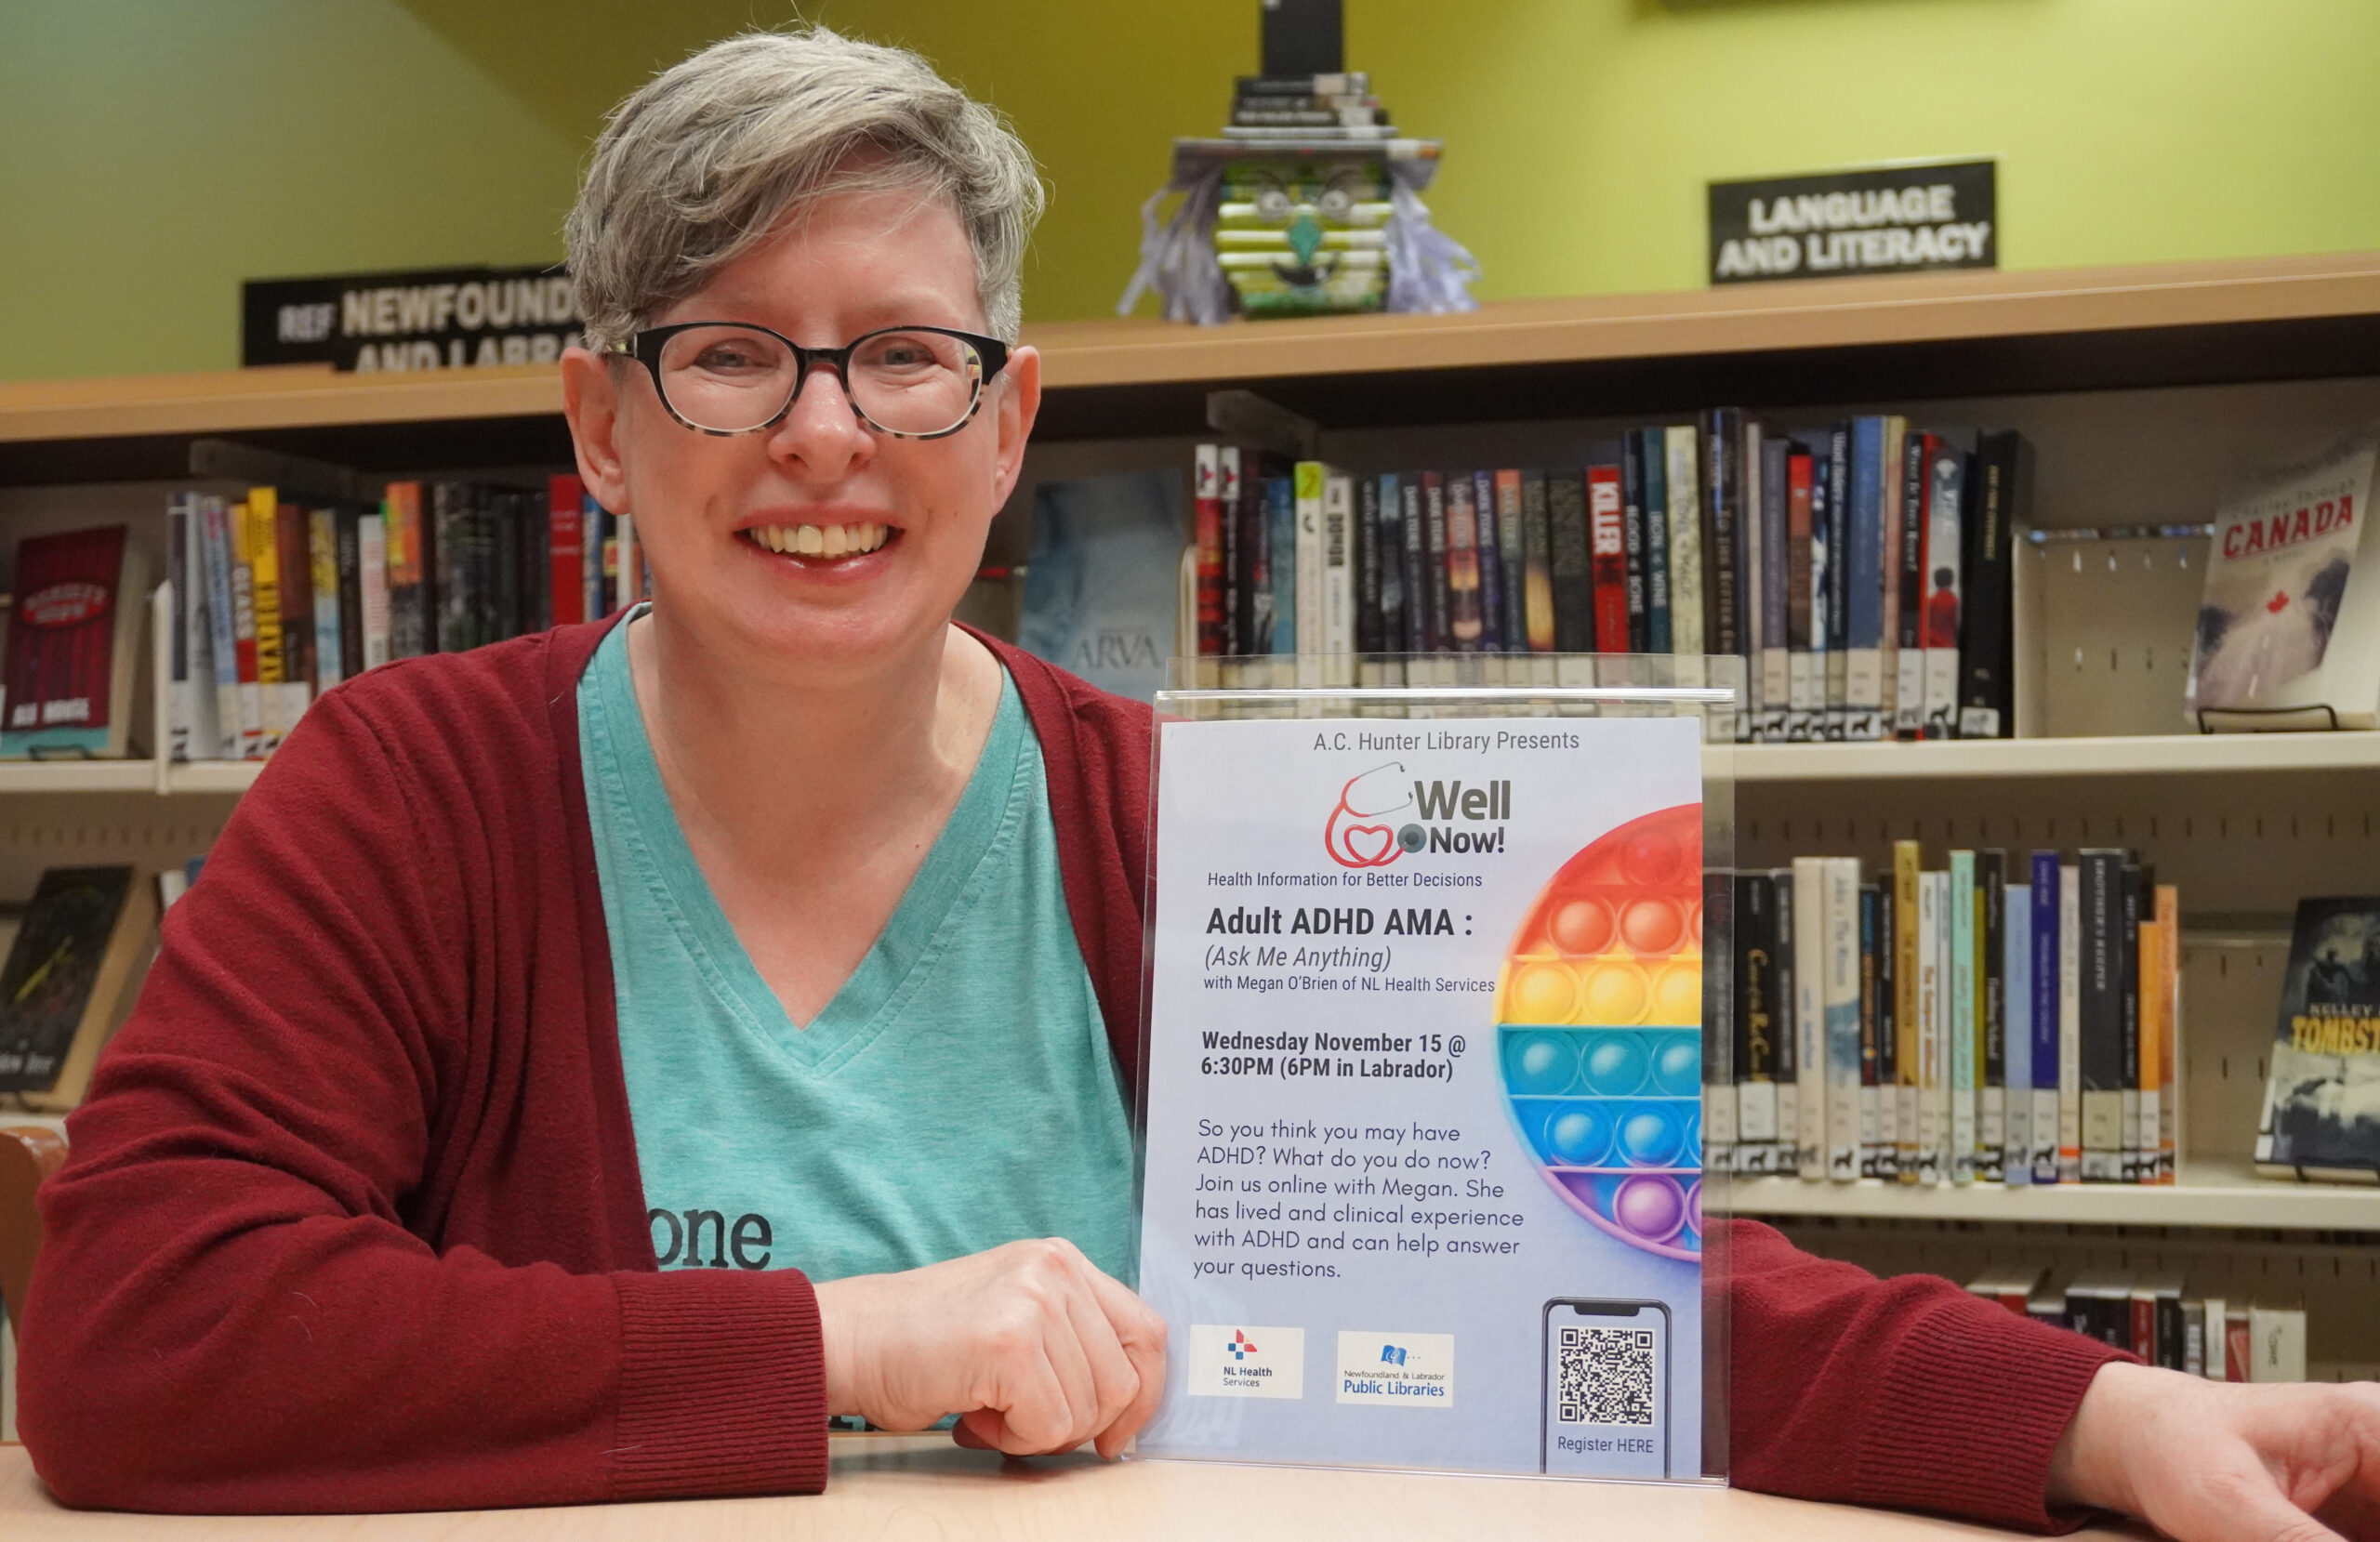 Julia Mayo is a library technician at the A.C Hunter Library. With a simile on her face and share about the coming event about adult ADHD. 